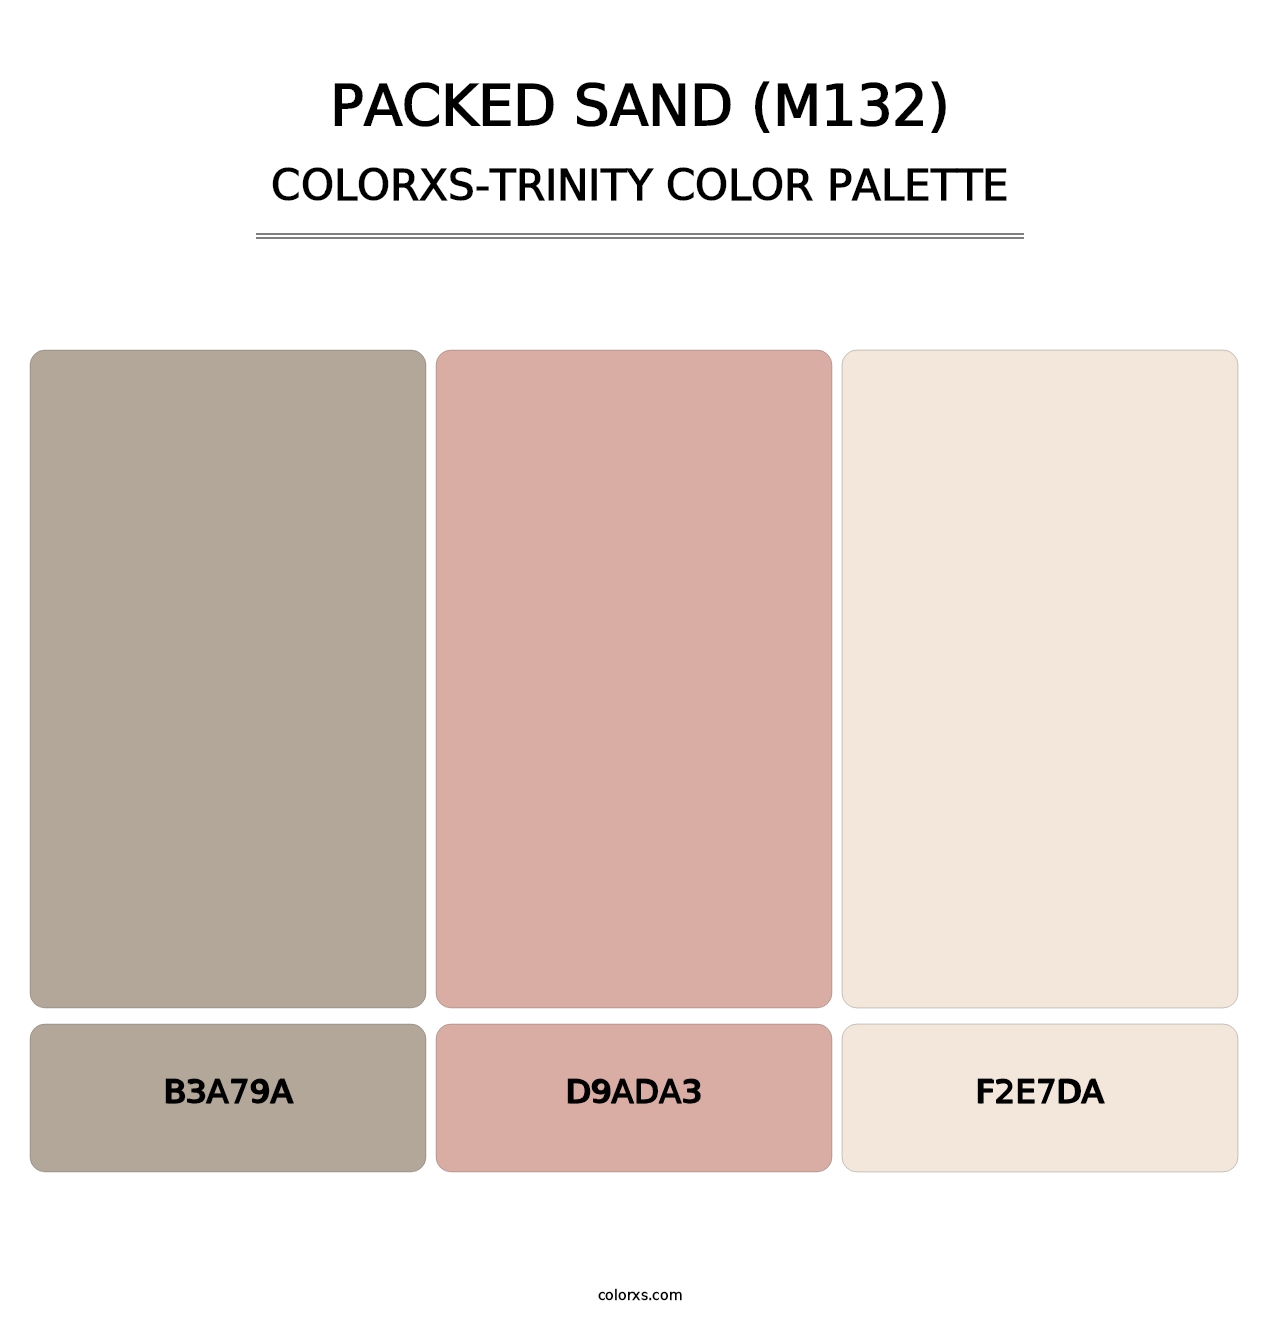 Packed Sand (M132) - Colorxs Trinity Palette